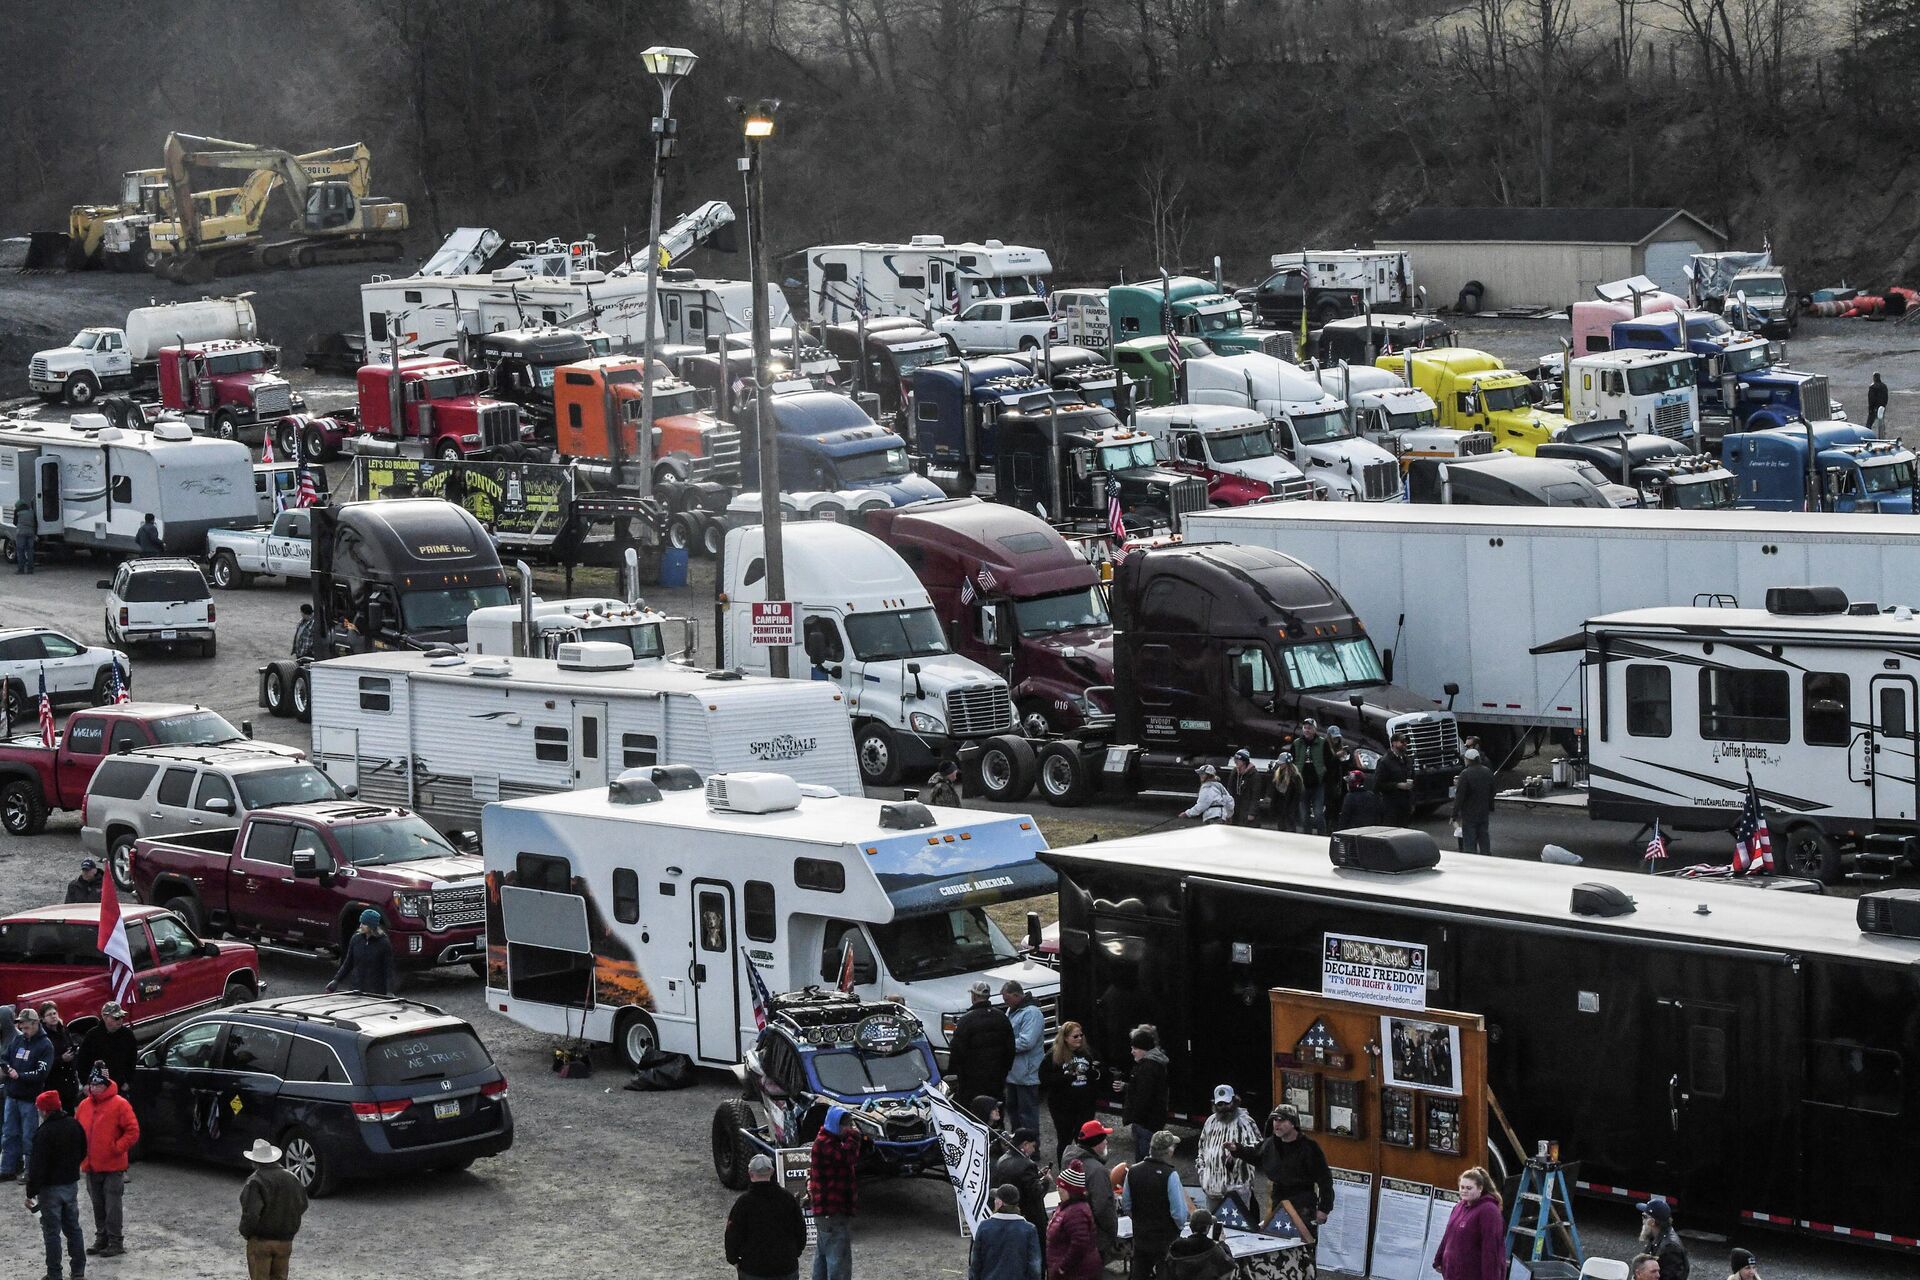 Vehicles are parked as part of a rally at Hagerstown Speedway, after some of them arrived as part of a convoy that traveled across the country to protest coronavirus disease (COVID-19) related mandates and other issues, in Hagerstown, Maryland, U.S., March 5, 2022. - Sputnik International, 1920, 05.03.2022